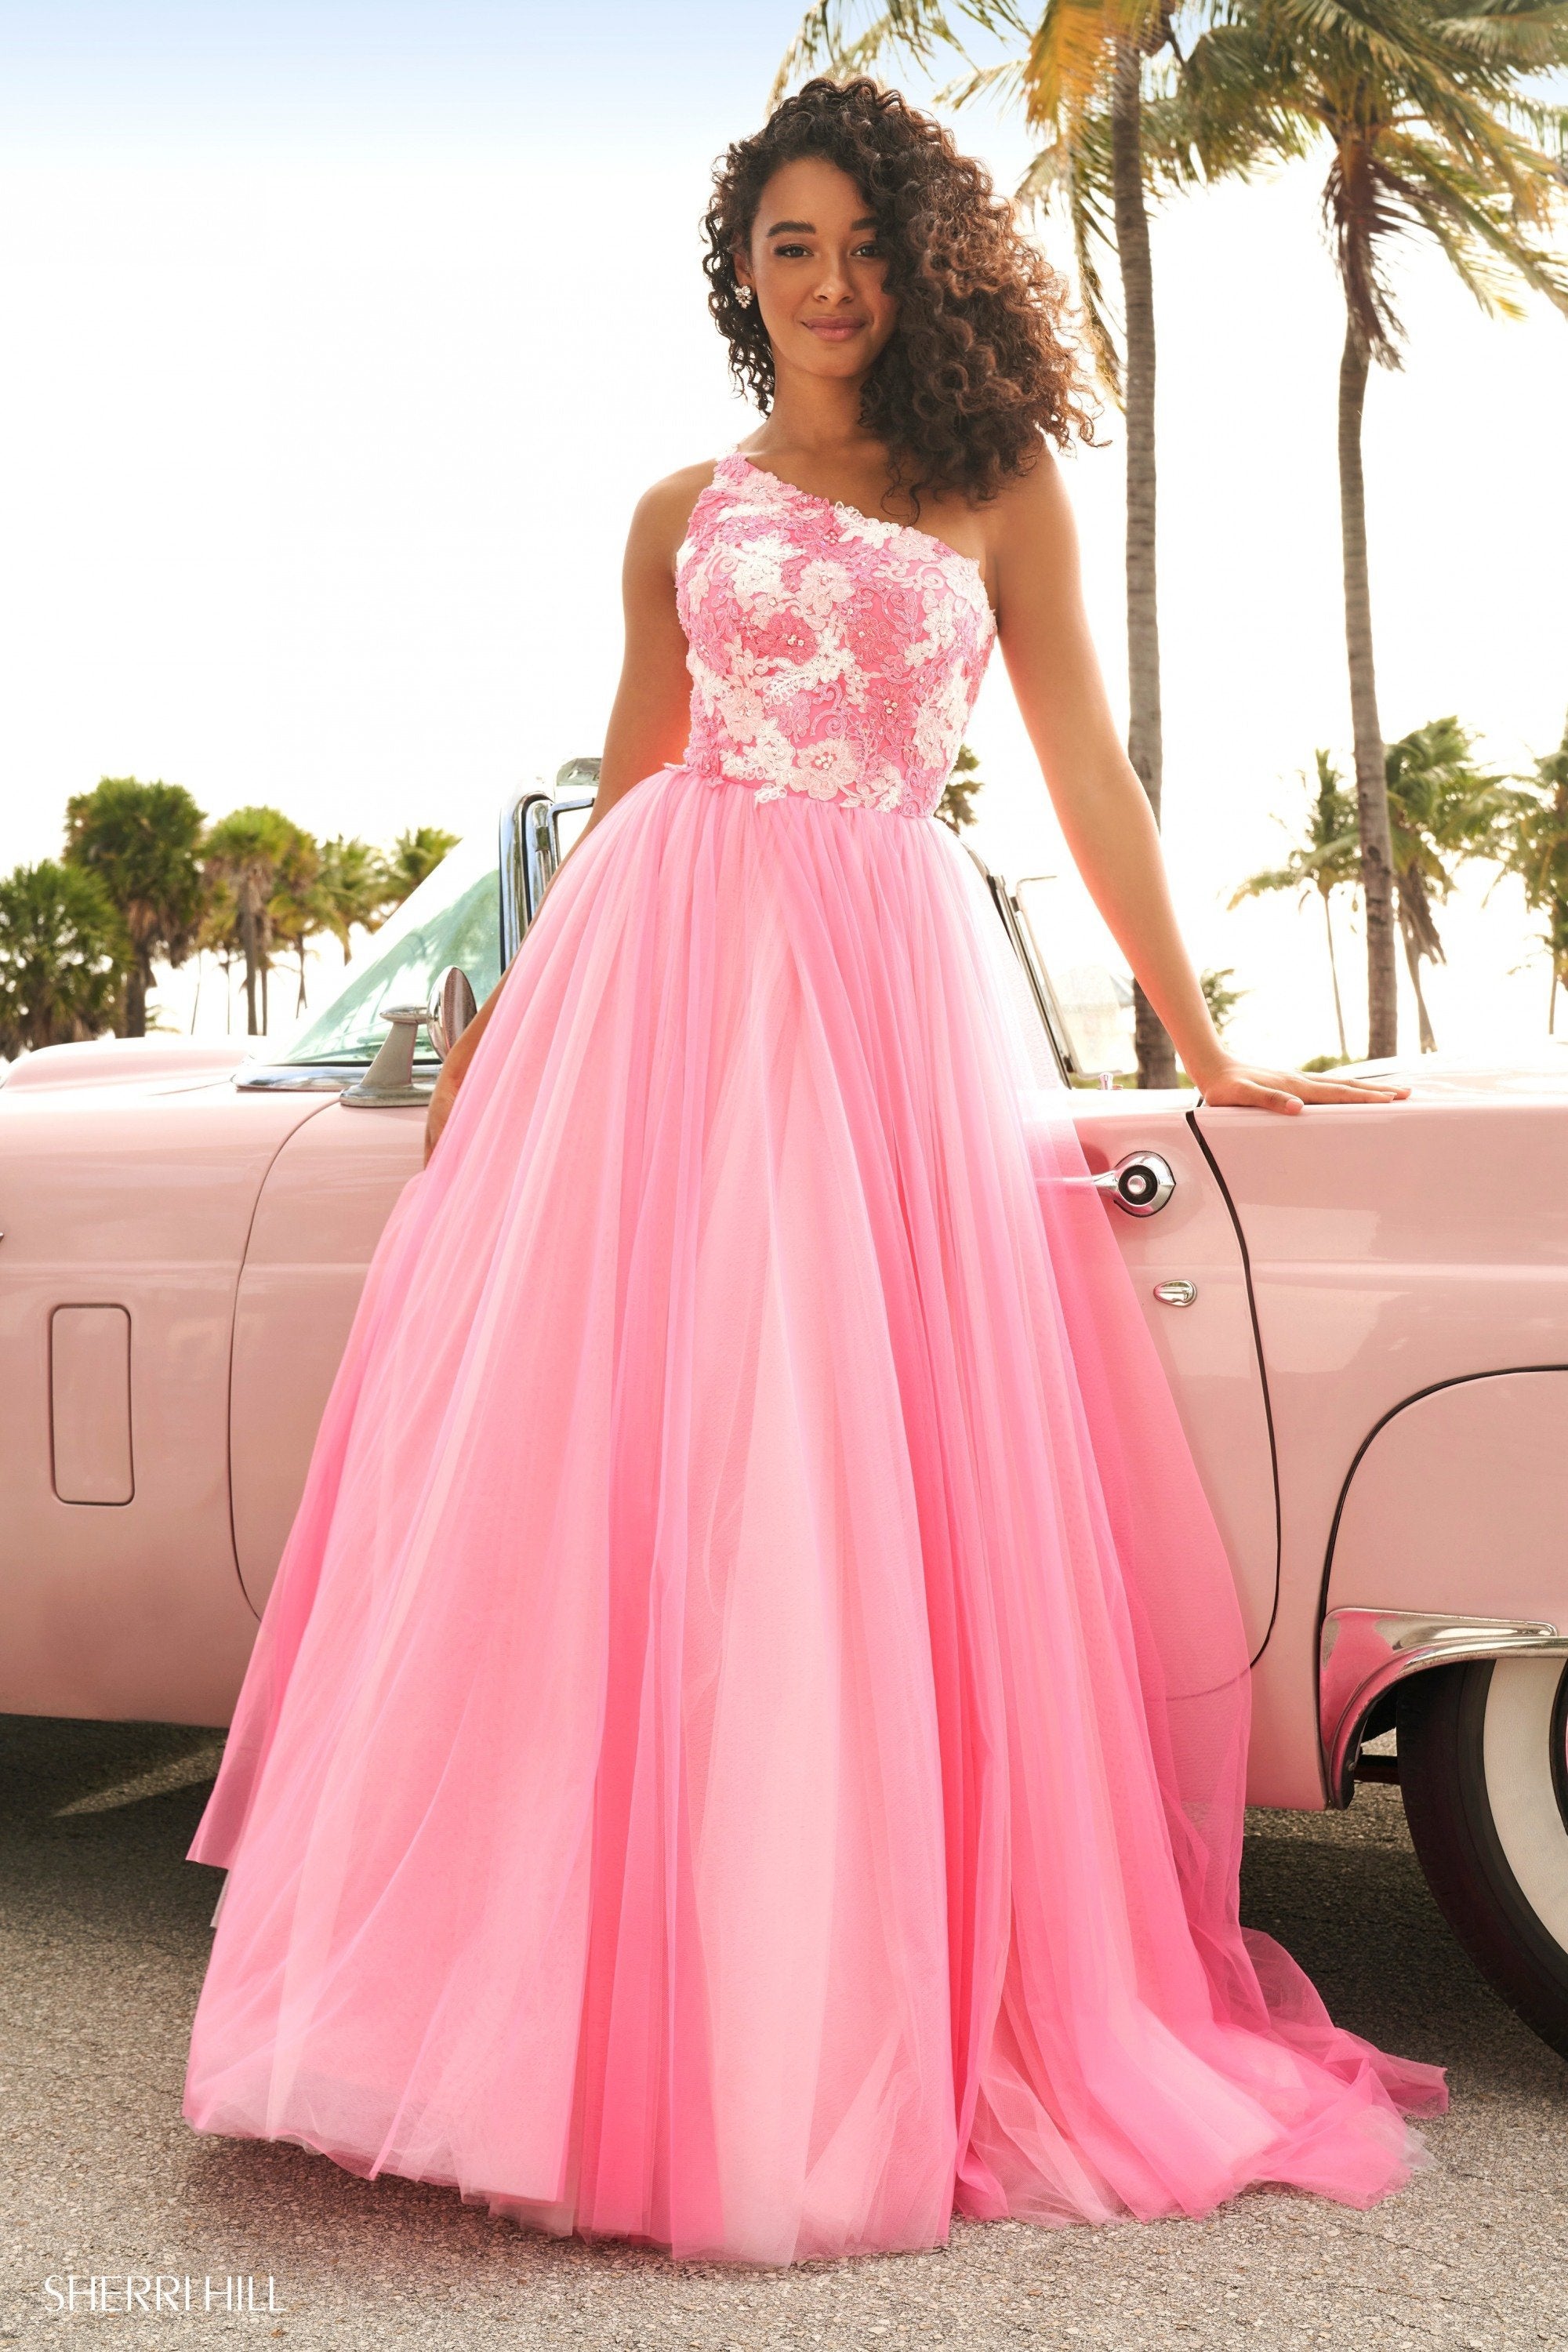 Sherri Hill 54285 dress images in these colors: Blue Ivory, Pink Ivory.